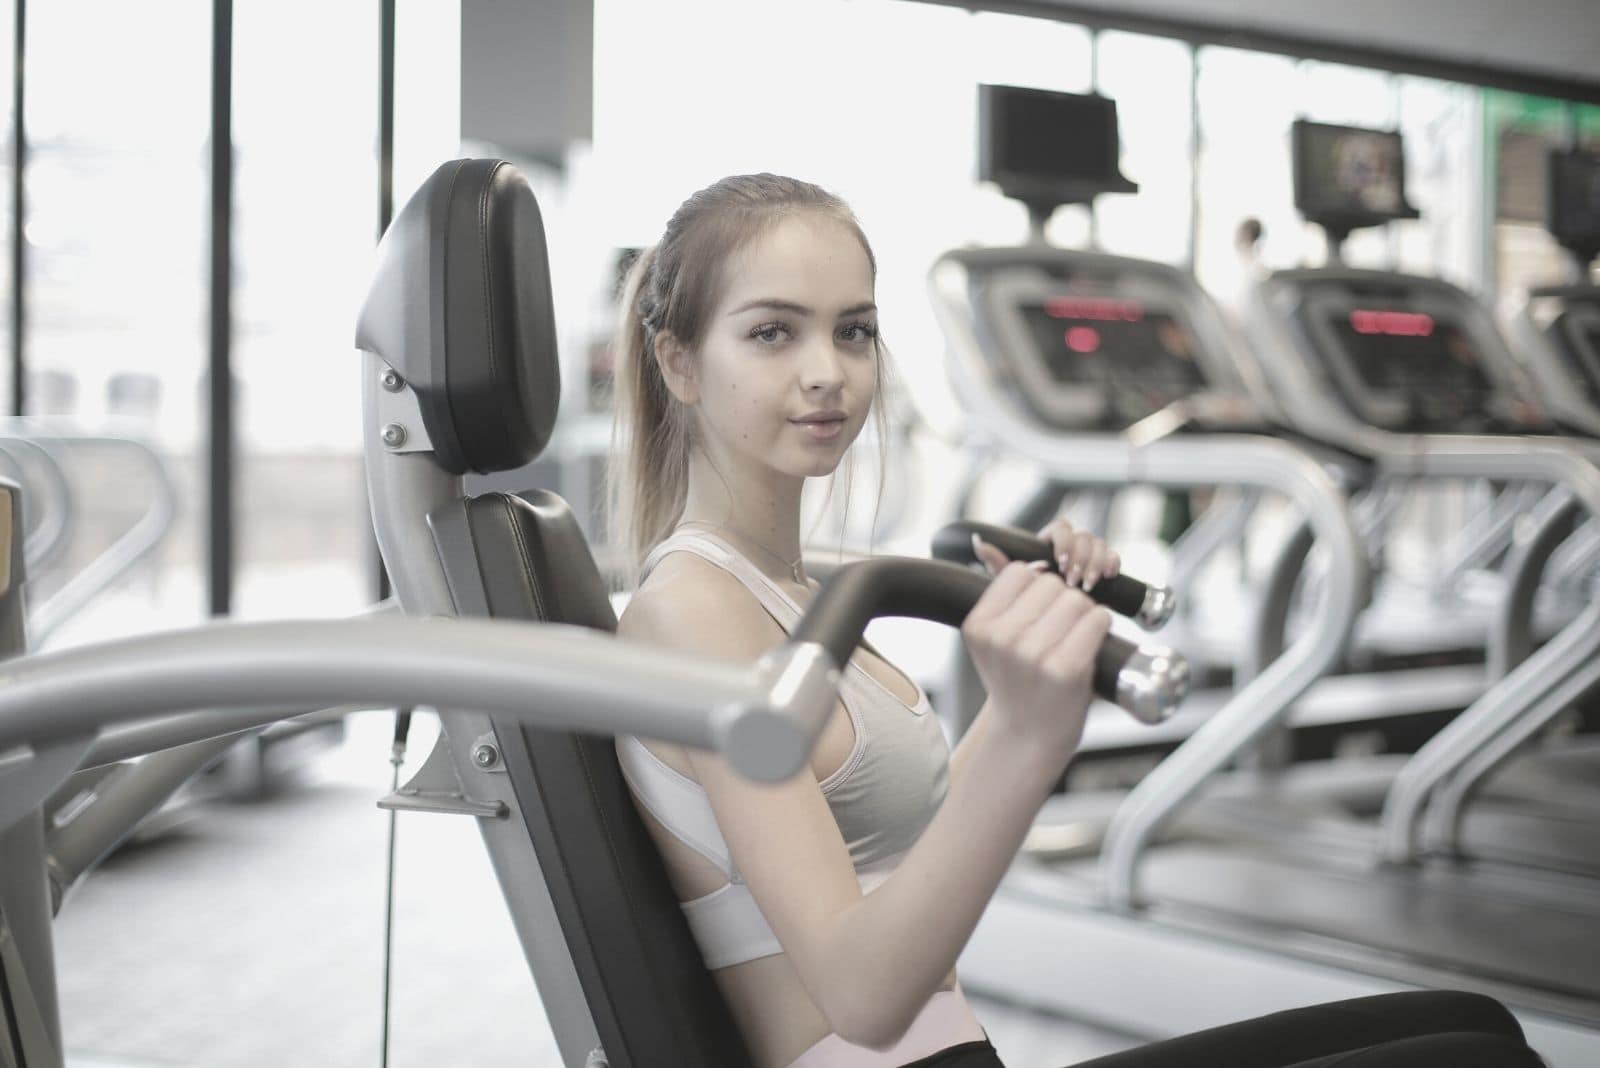 woman using an equipment in exercising inside the gym looking at the camera